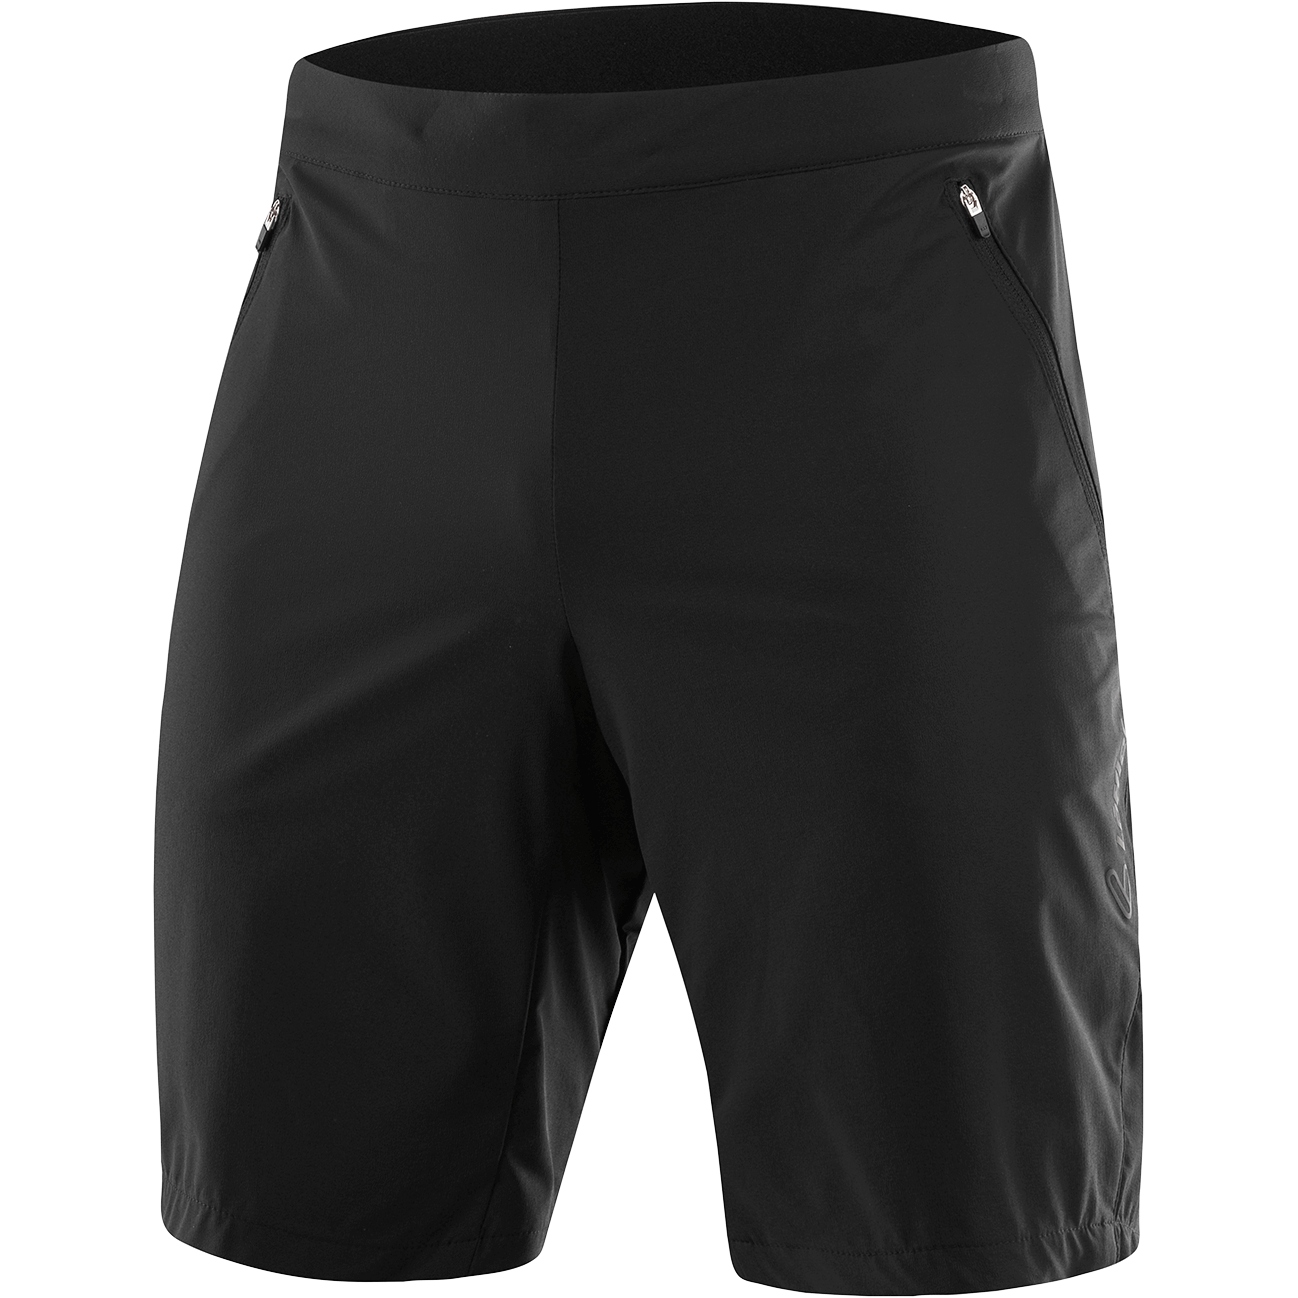 Cycling undershorts: What are the different models? LÖFFLER EN